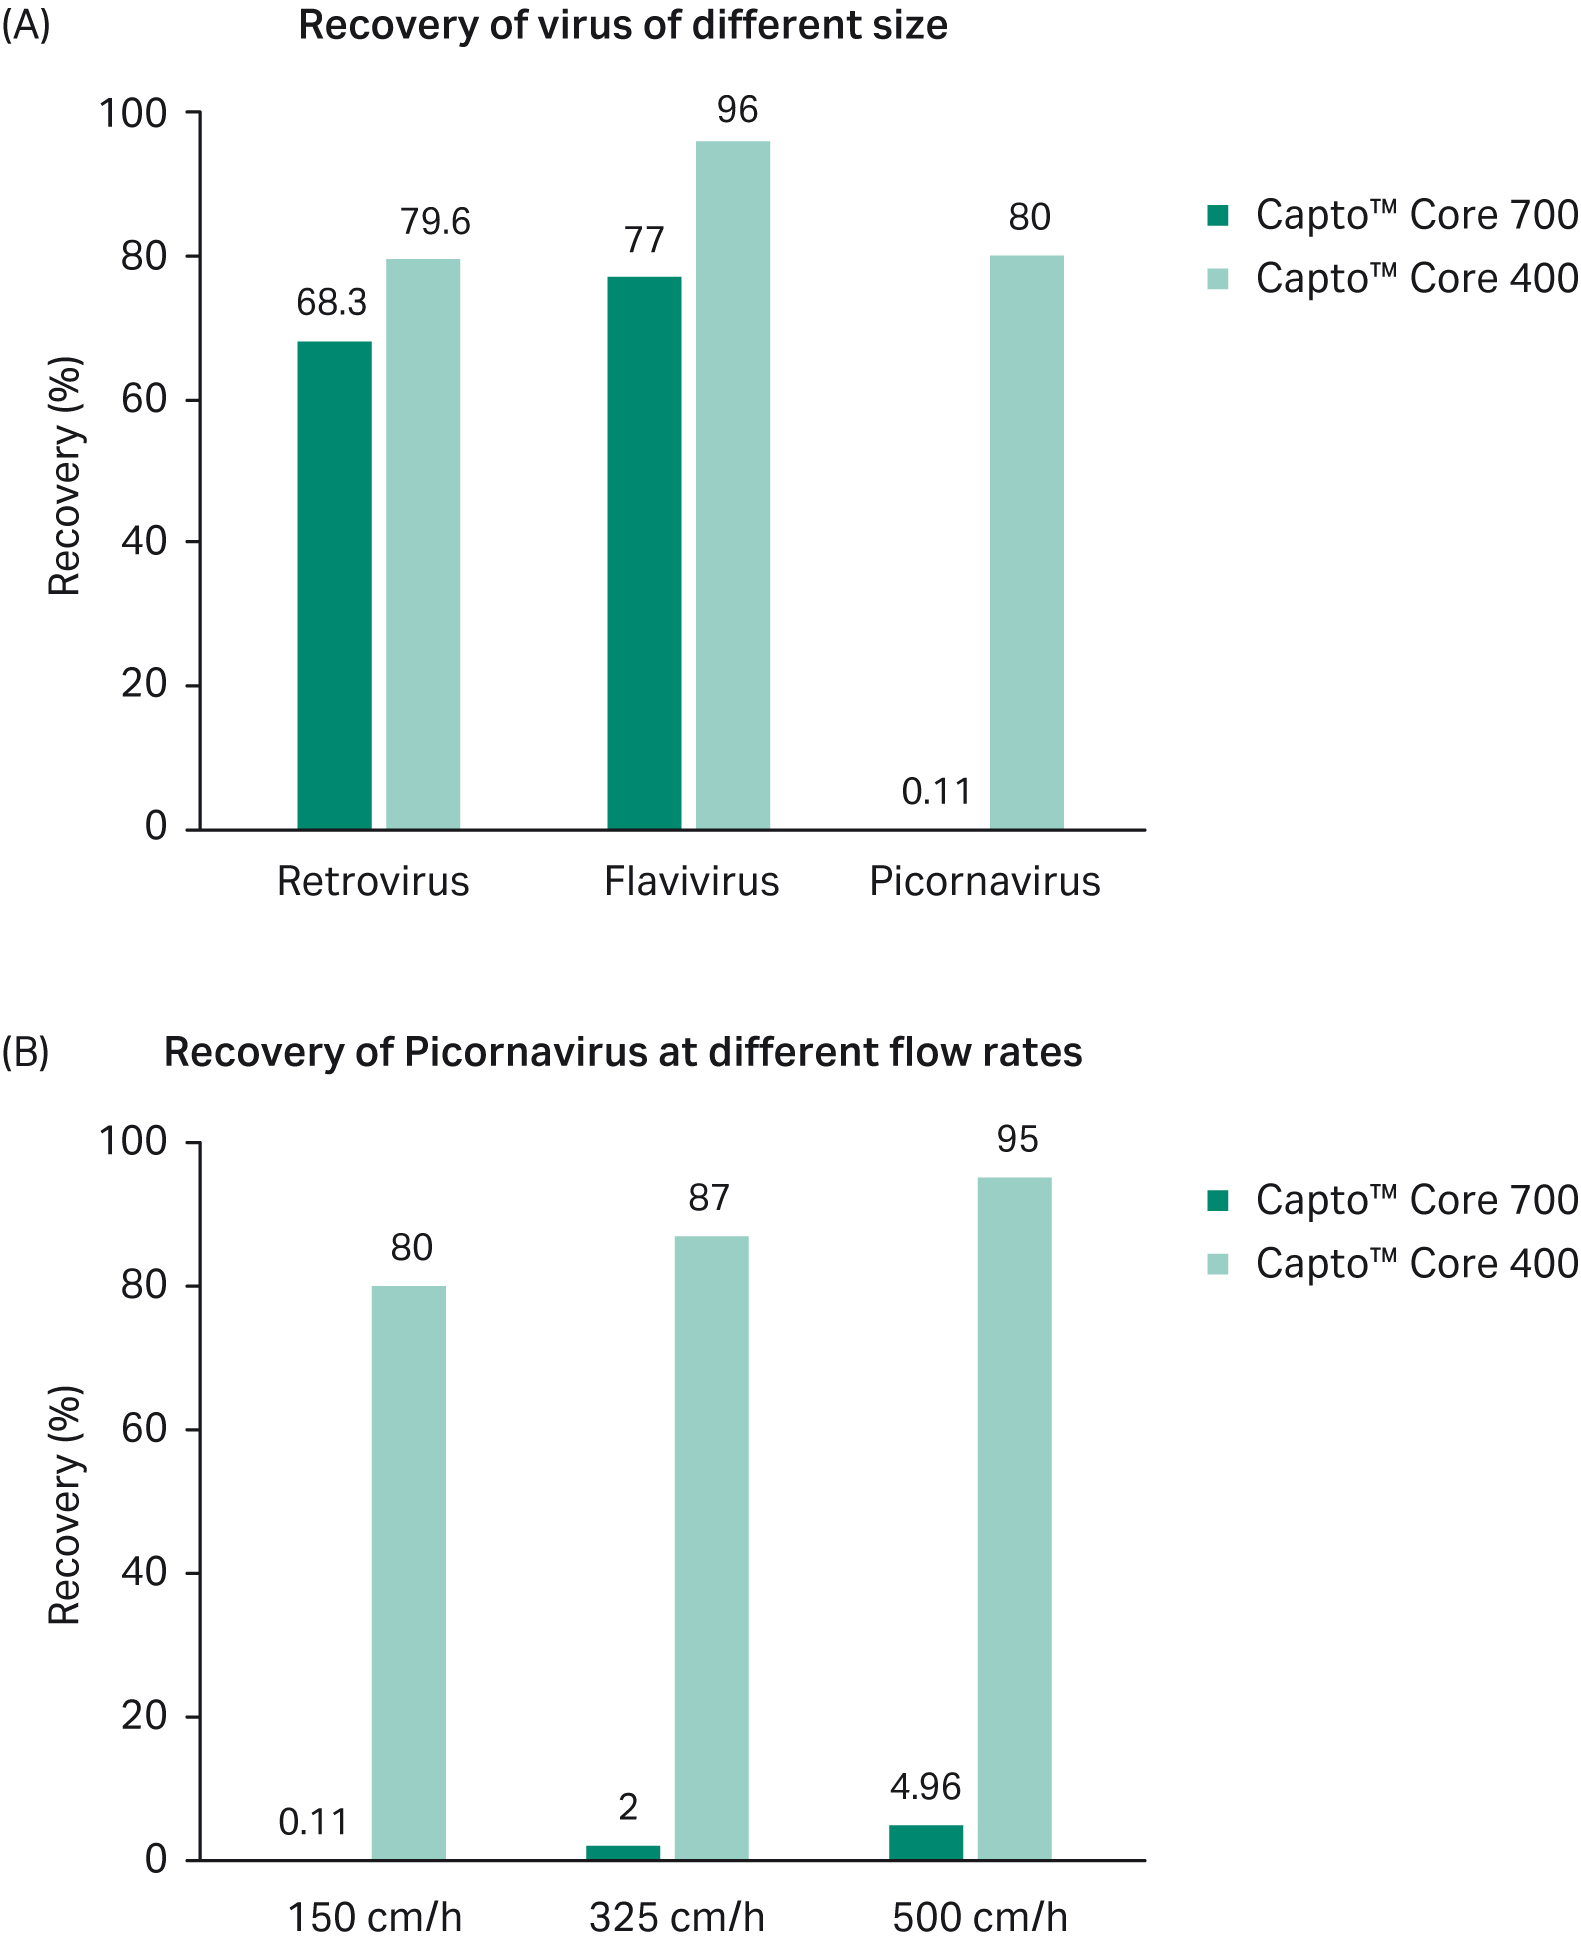 Target molecule recovery percentages of Capto™ Core beads for different viruses (A) and at different flow rates (B). 